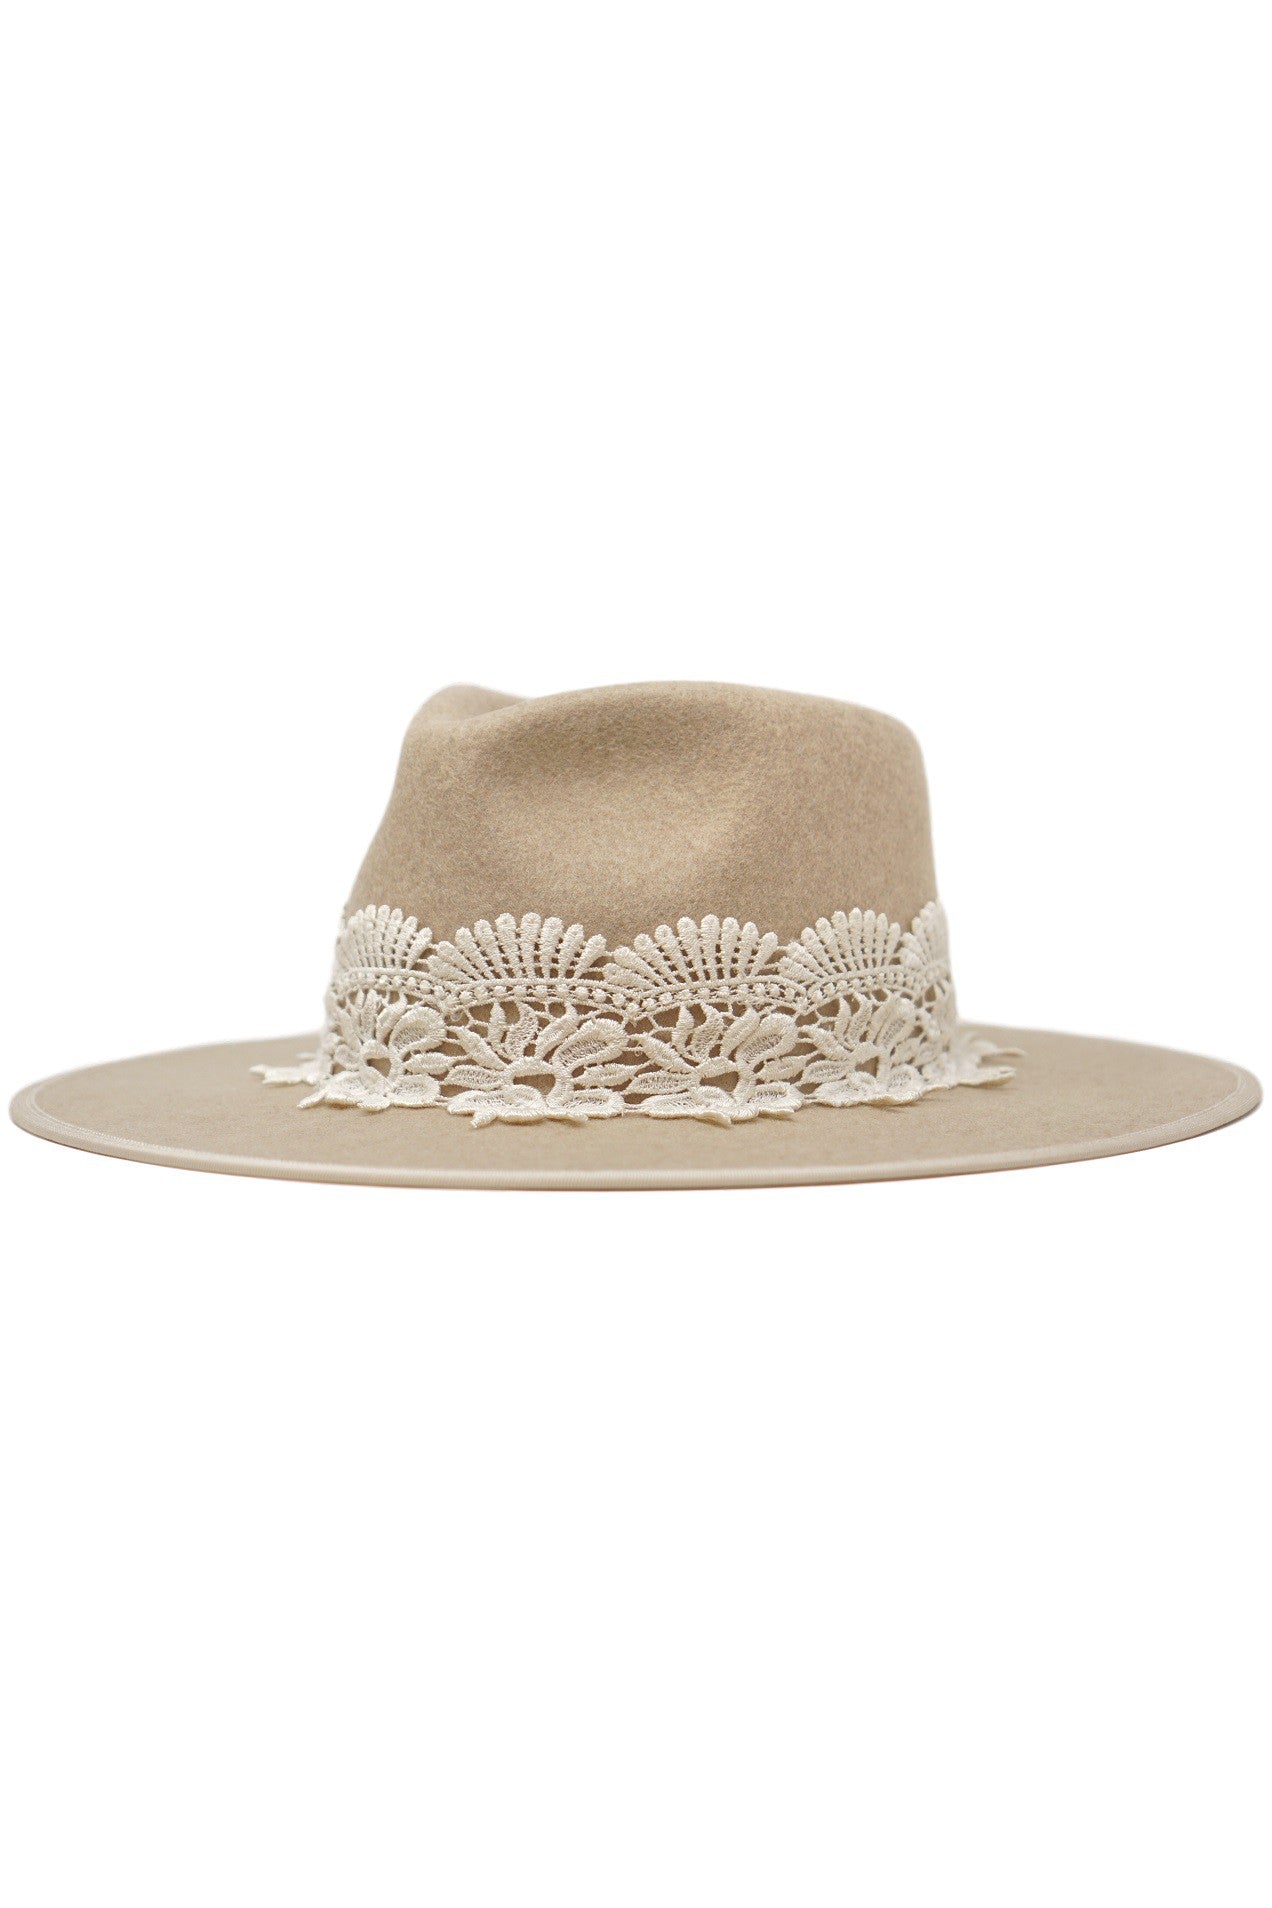 Olive & Pique Pinched Crown Fedora with Jacquard Band